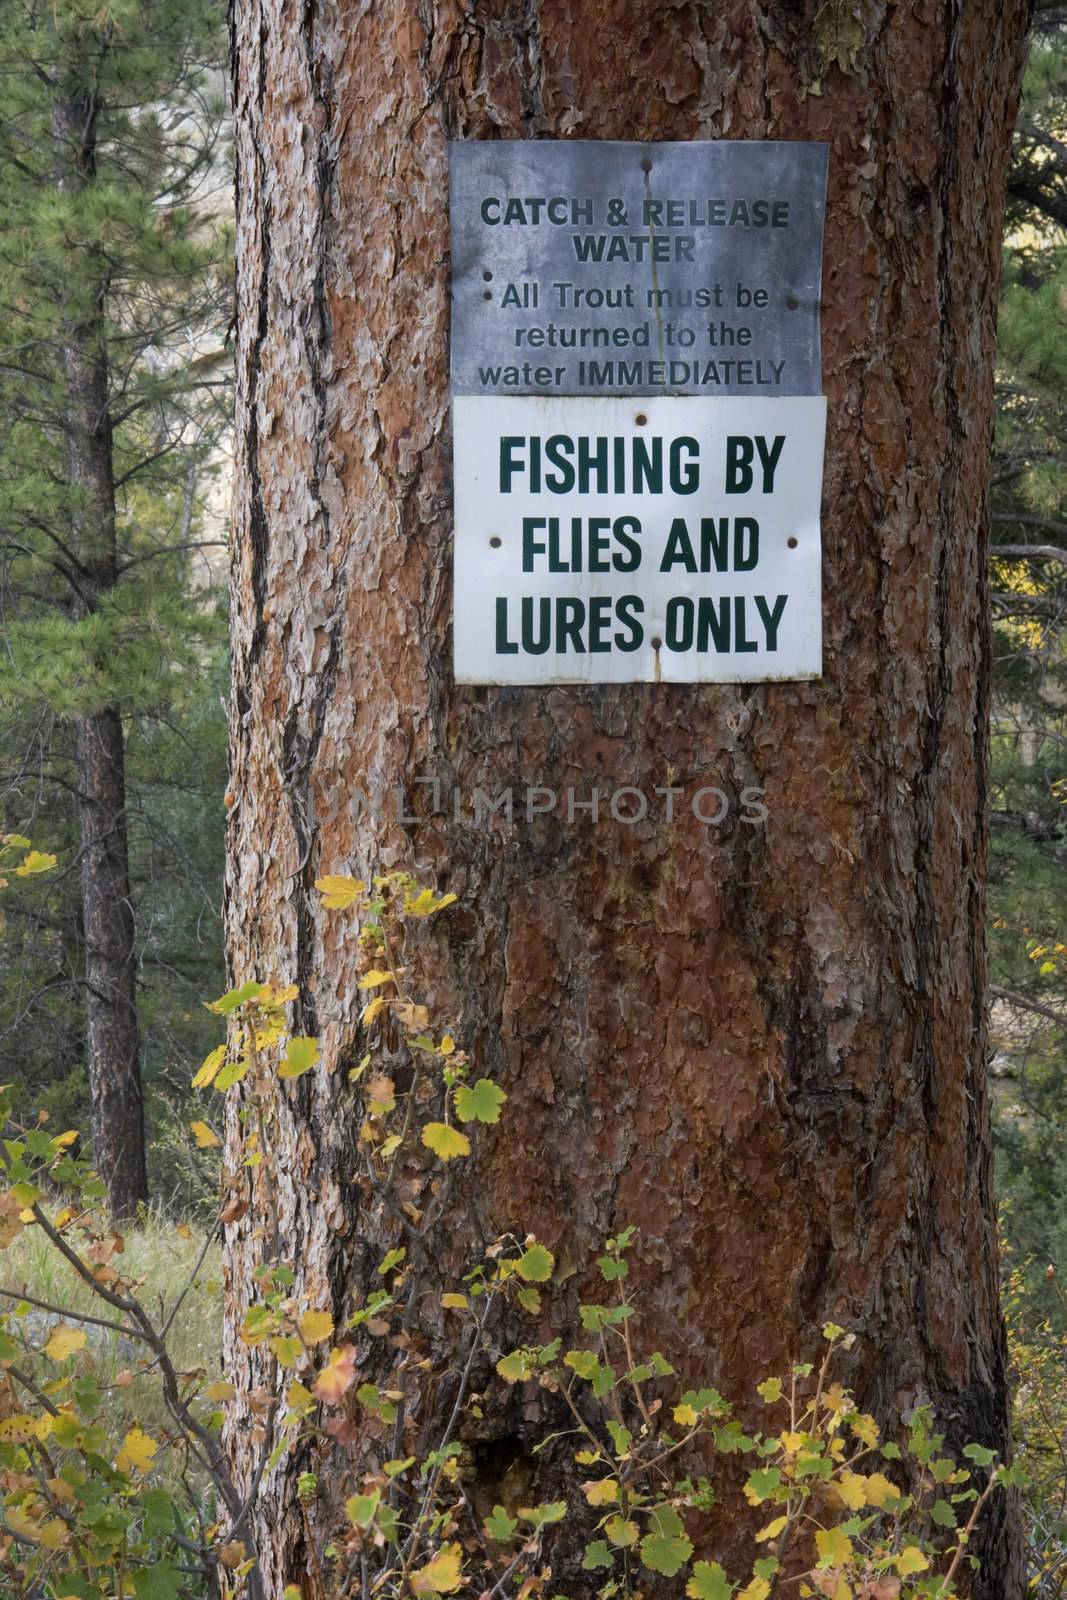 catch and release water, fishing by flies and lures only - two warning signs on a trunk of pine tree, Poudre River, Colorado